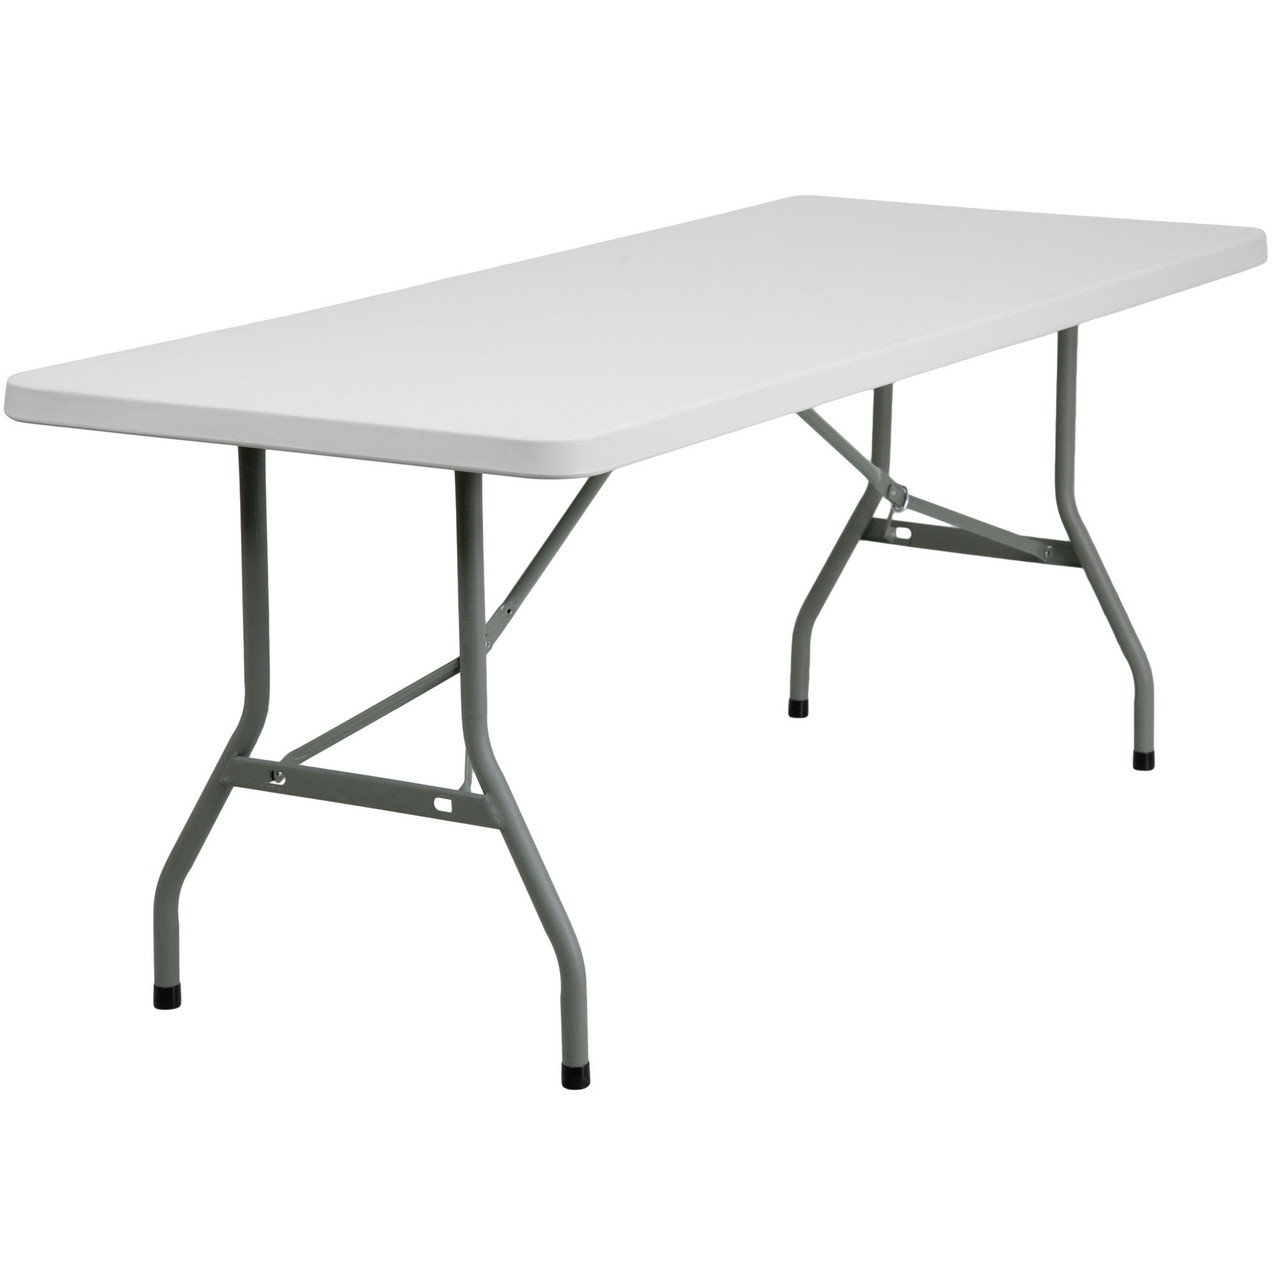 White Top Commercial Grade 60-inch Folding Table Holds up to 330 lbs 